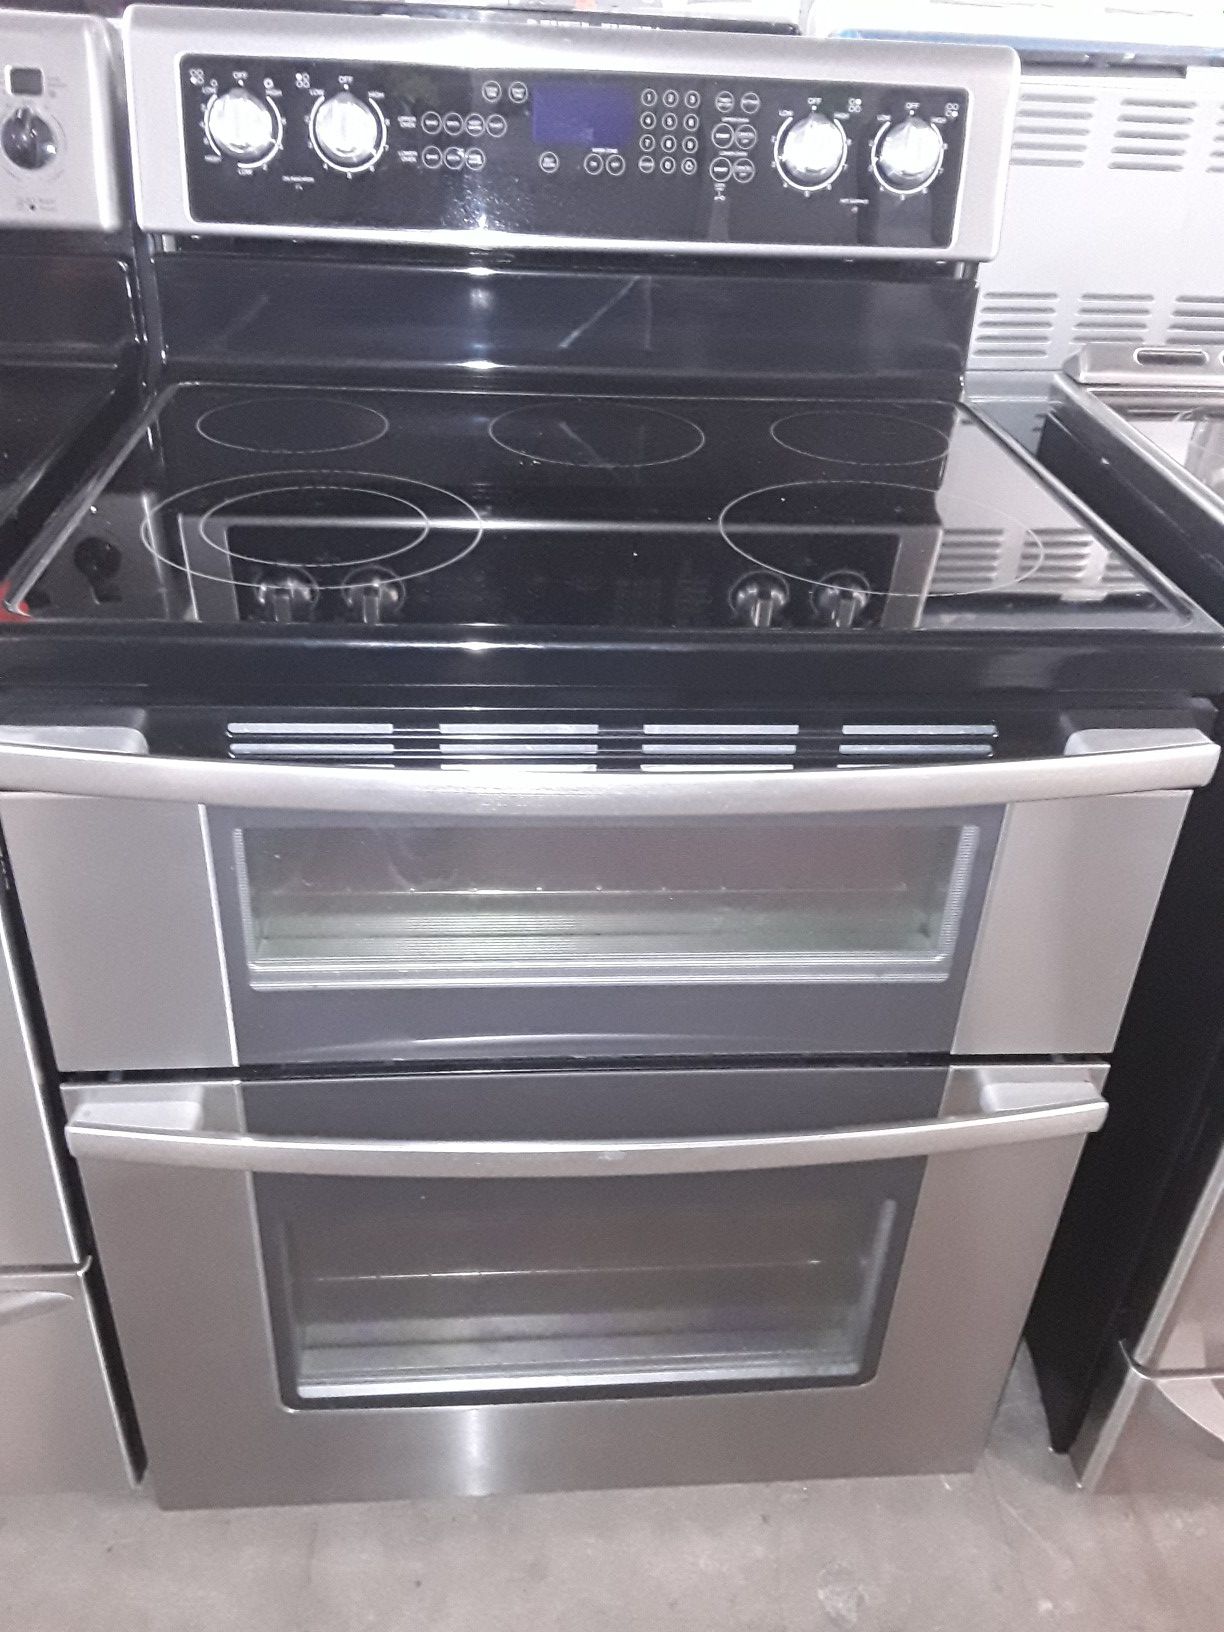 Whirlpool double oven stove